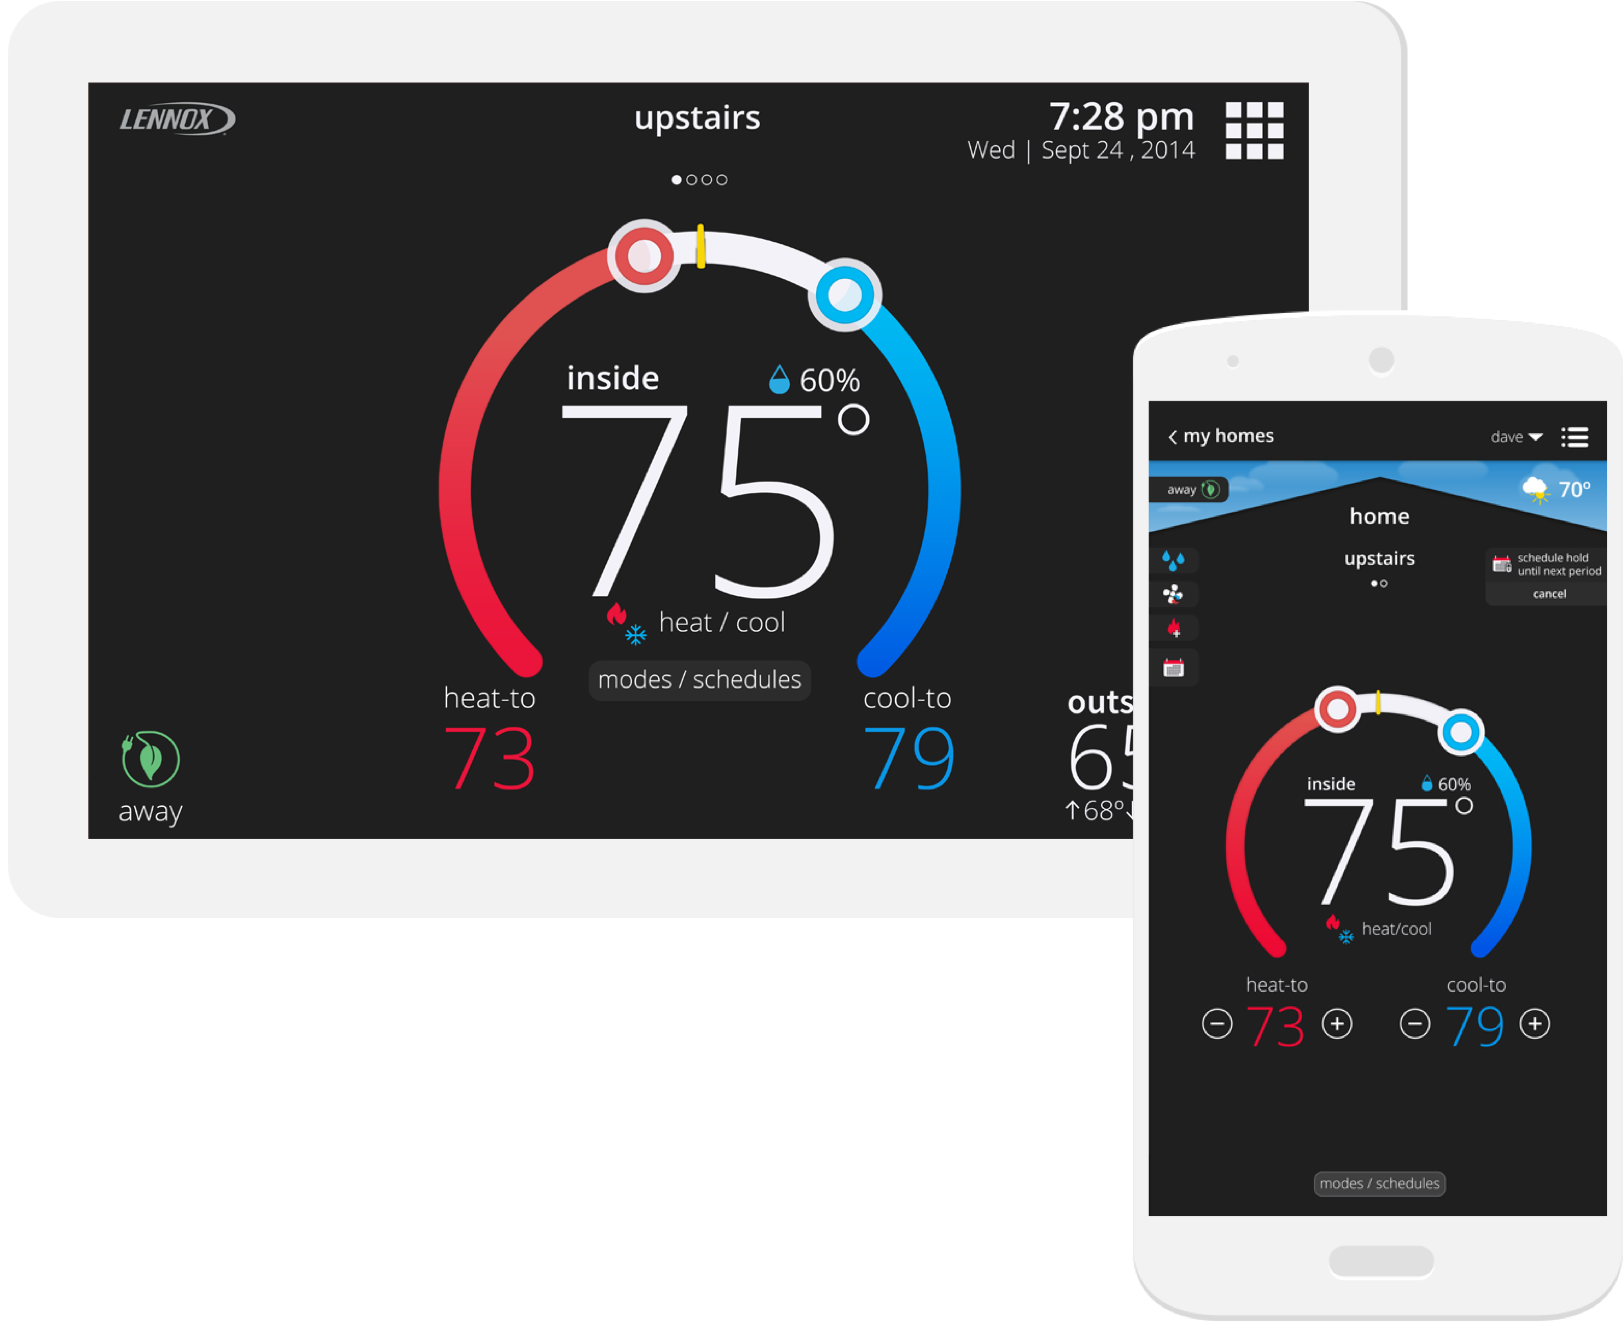 Lennox iComfort S30 Thermostat on Android and iOS